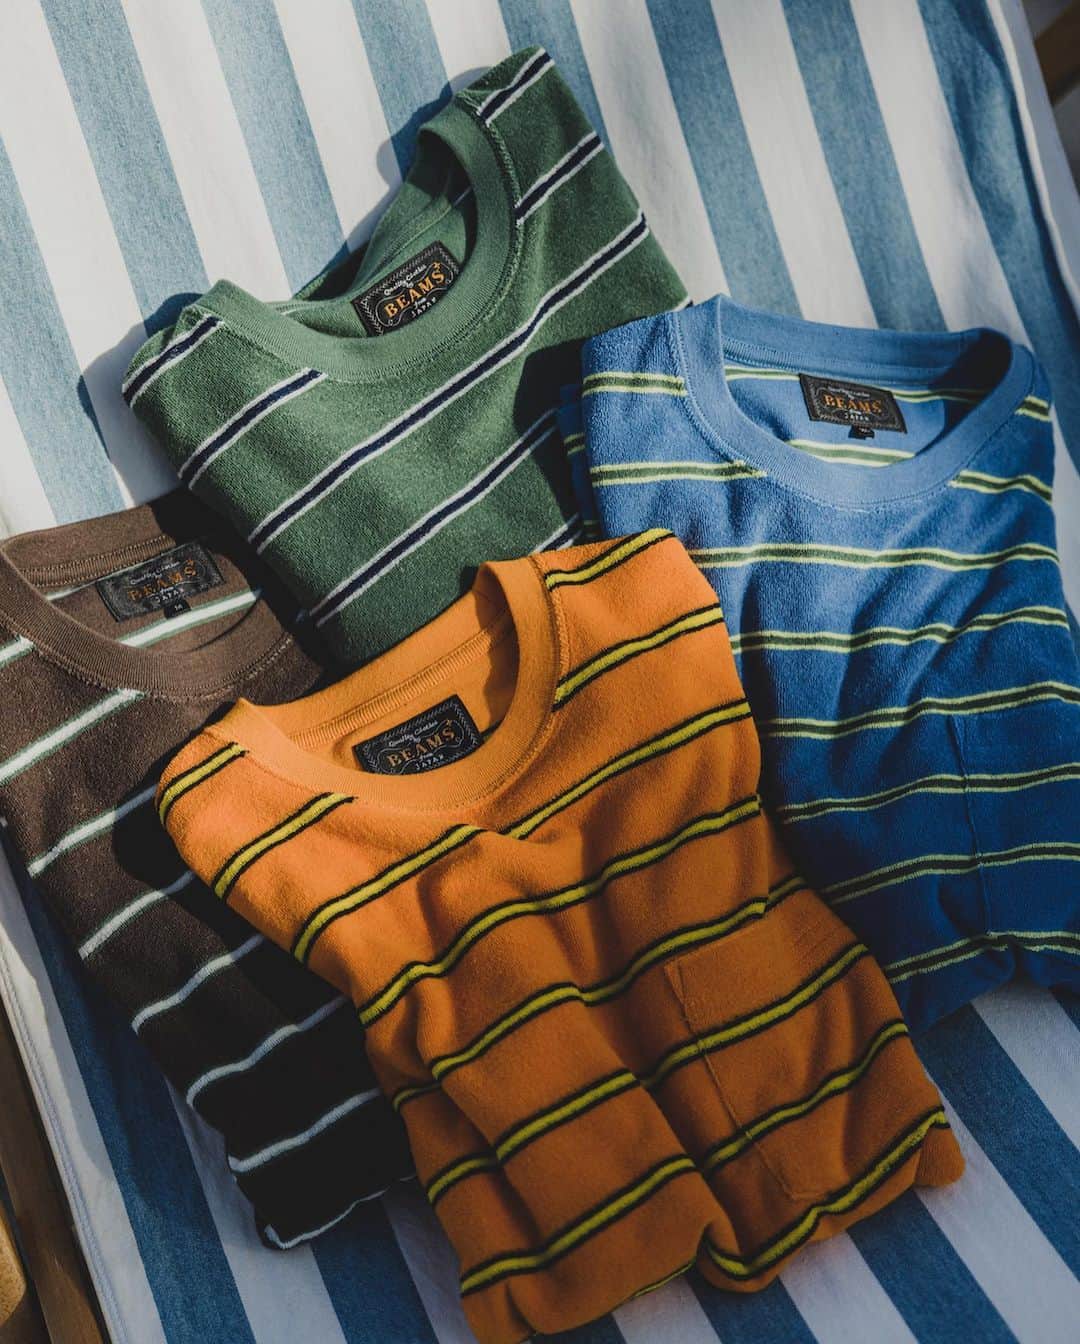 BEAMS+さんのインスタグラム写真 - (BEAMS+Instagram)「... Hope you love the laid-back vibe of BEAMS PLUS classic beachwear! ---------- ●Pocket Tee Pile Stripe A comfy T-shirt with a cool striped design, perfect for the beach. It's made from a mix of cotton and polyester for a soft feel.  ●Pocket Tee Jacquard Stripe This tee draws inspiration from vintage styles and features a unique jacquard stripe pattern created with special yarn.  ●B.D. Double Gauze Enjoy the breezy and soft feel of this gauze material, which has a lovely textured finish.  ●MIL 1 Pleat Athletic Shorts These shorts are designed with a touch of vintage charm, made from smooth nylon taffeta, and inspired by U.S. Navy swim shorts.  快適な着心地と洗練されたスタイル、BEAMS PLUSのクラシックなビーチウェア。 ---------- ● Pocket Tee Pile Stripe 海が似合うパイル素材とストライプ。コットンとポリエステルの混紡生地を使用。パイル地のループ長を短く設定し、パイル特有の重みを軽減。肌触りと着心地を考えたパイルTシャツ。  ● Pocket Tee Jacquard Stripe ビンテージ Tシャツから着想し、オリジナルで編み立てたジャカードストライプ。40番双糸を使い、4色の先染め糸で編みあげています。  ● B.D. Double Gauze 柔らかで通気性に富むガーゼ素材。生地染めを行うことでふっくらとした風合いに仕上げています。   ● MIL 1 Pleat Athletic Shorts 50デニールナイロンタフタを使用。ヴィンテージ感のある微光沢のナイロンは、もちろんオリジナルファブリック。 U.S.NAVYのスイムショーツをベースにデザインしたモデルです。 . @beams_plus @beams_plus_harajuku @beams_plus_yurakucho #beamsplus」8月8日 20時02分 - beams_plus_harajuku